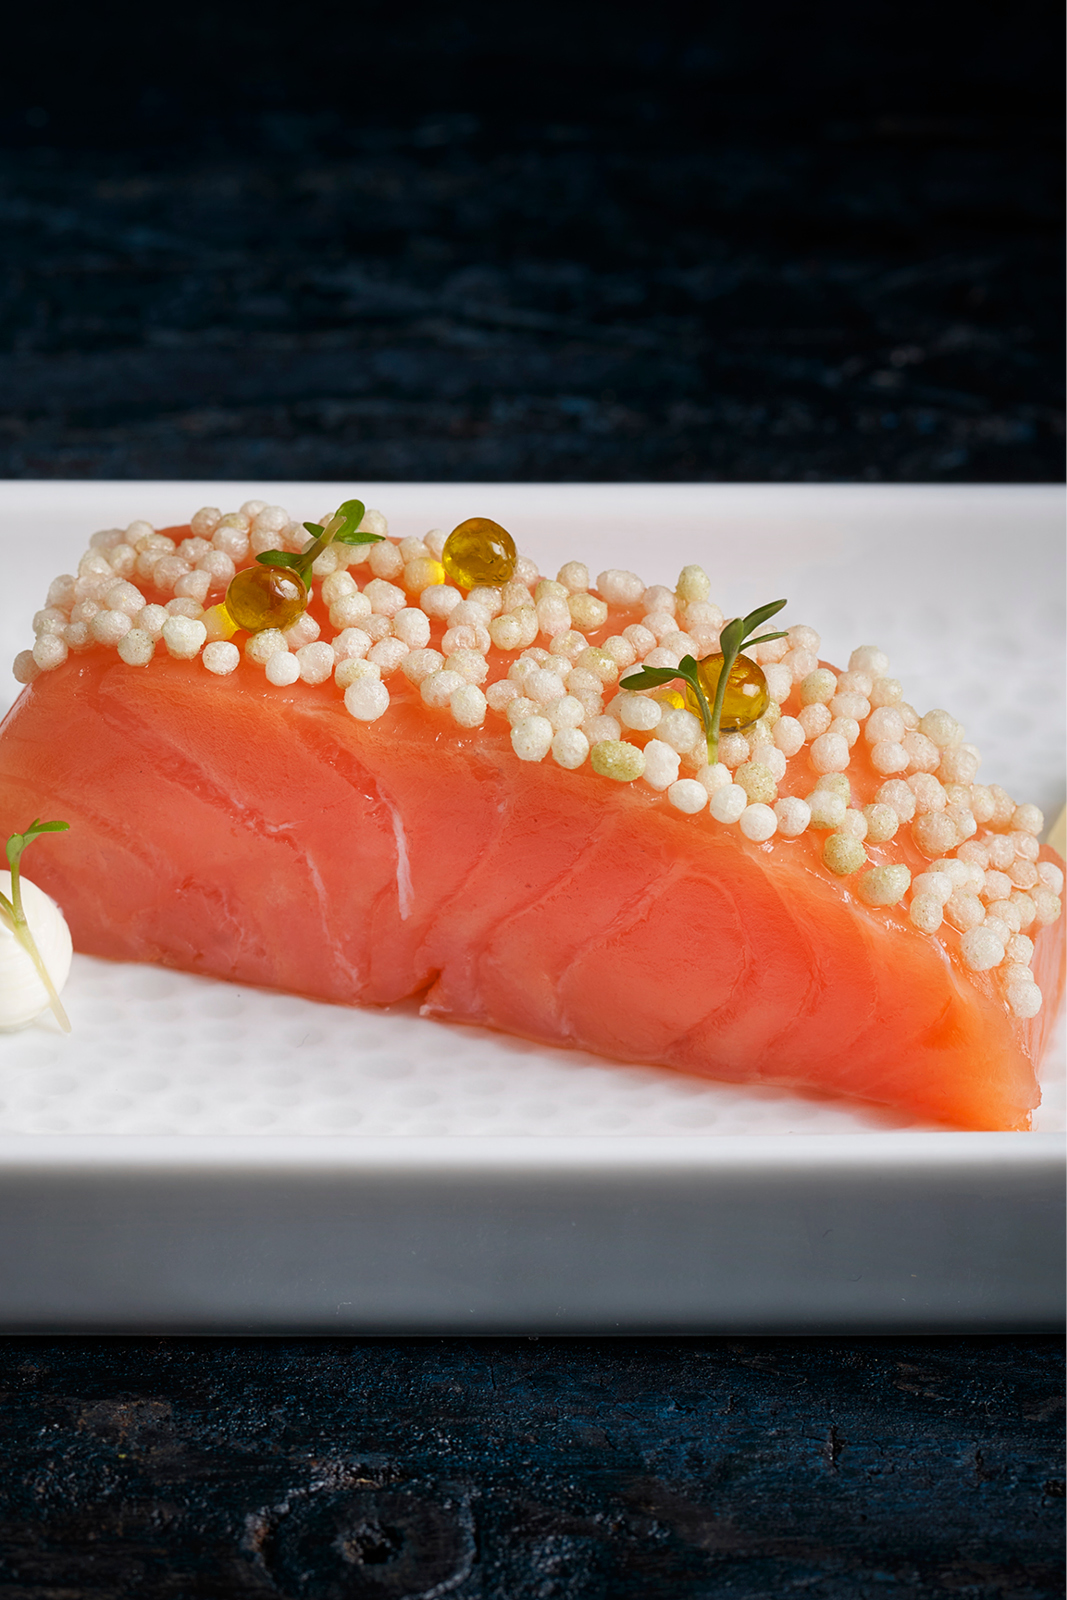 Cold-smoked salmon with crispies